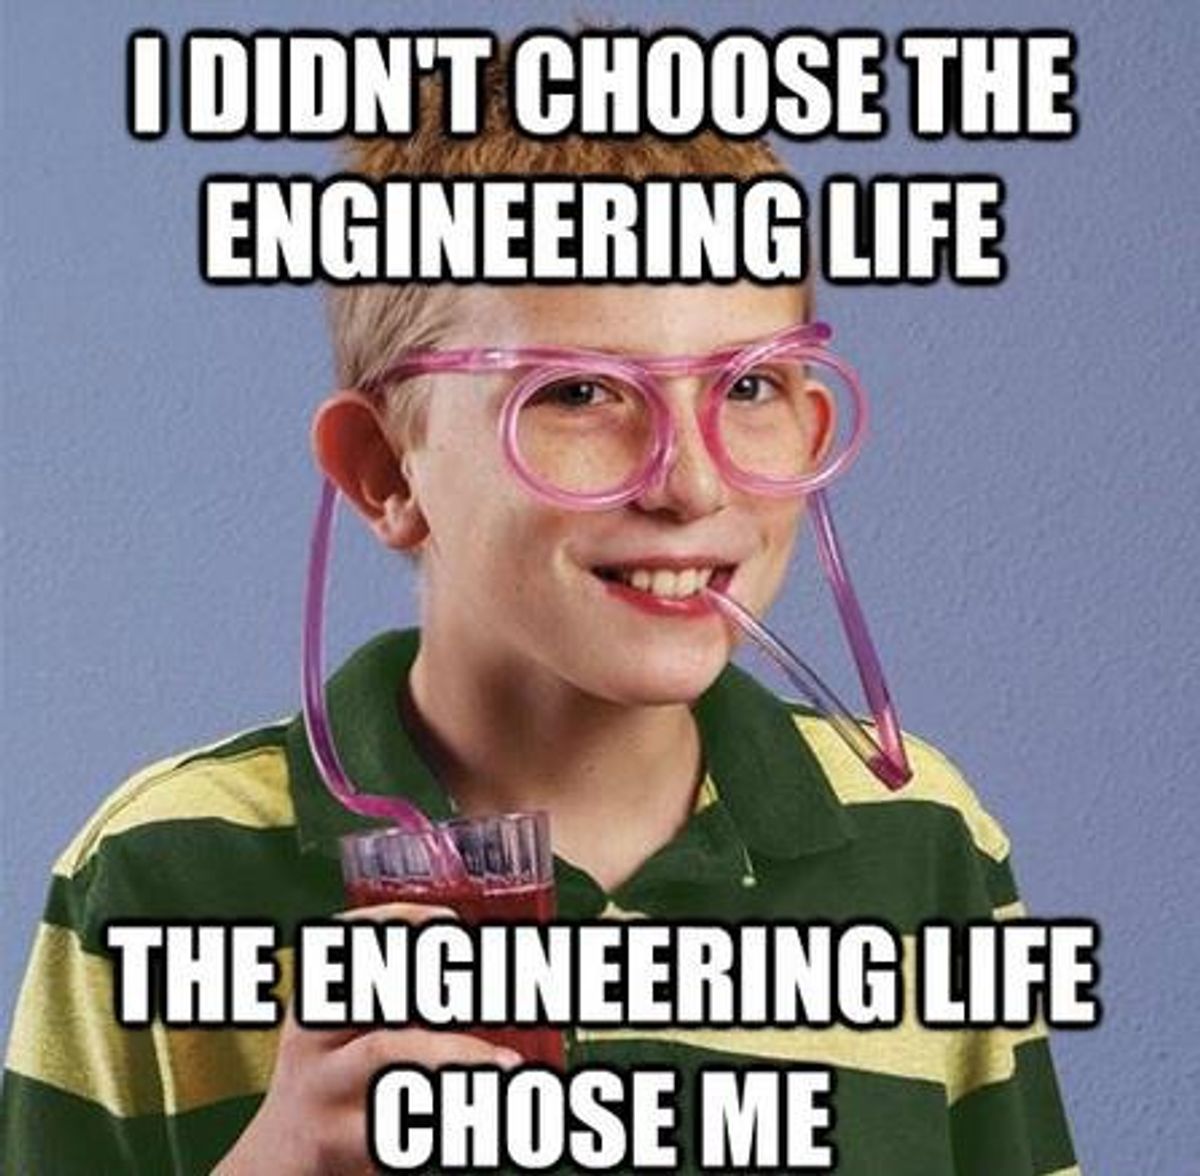 11 Perks Of Going To An Engineering School